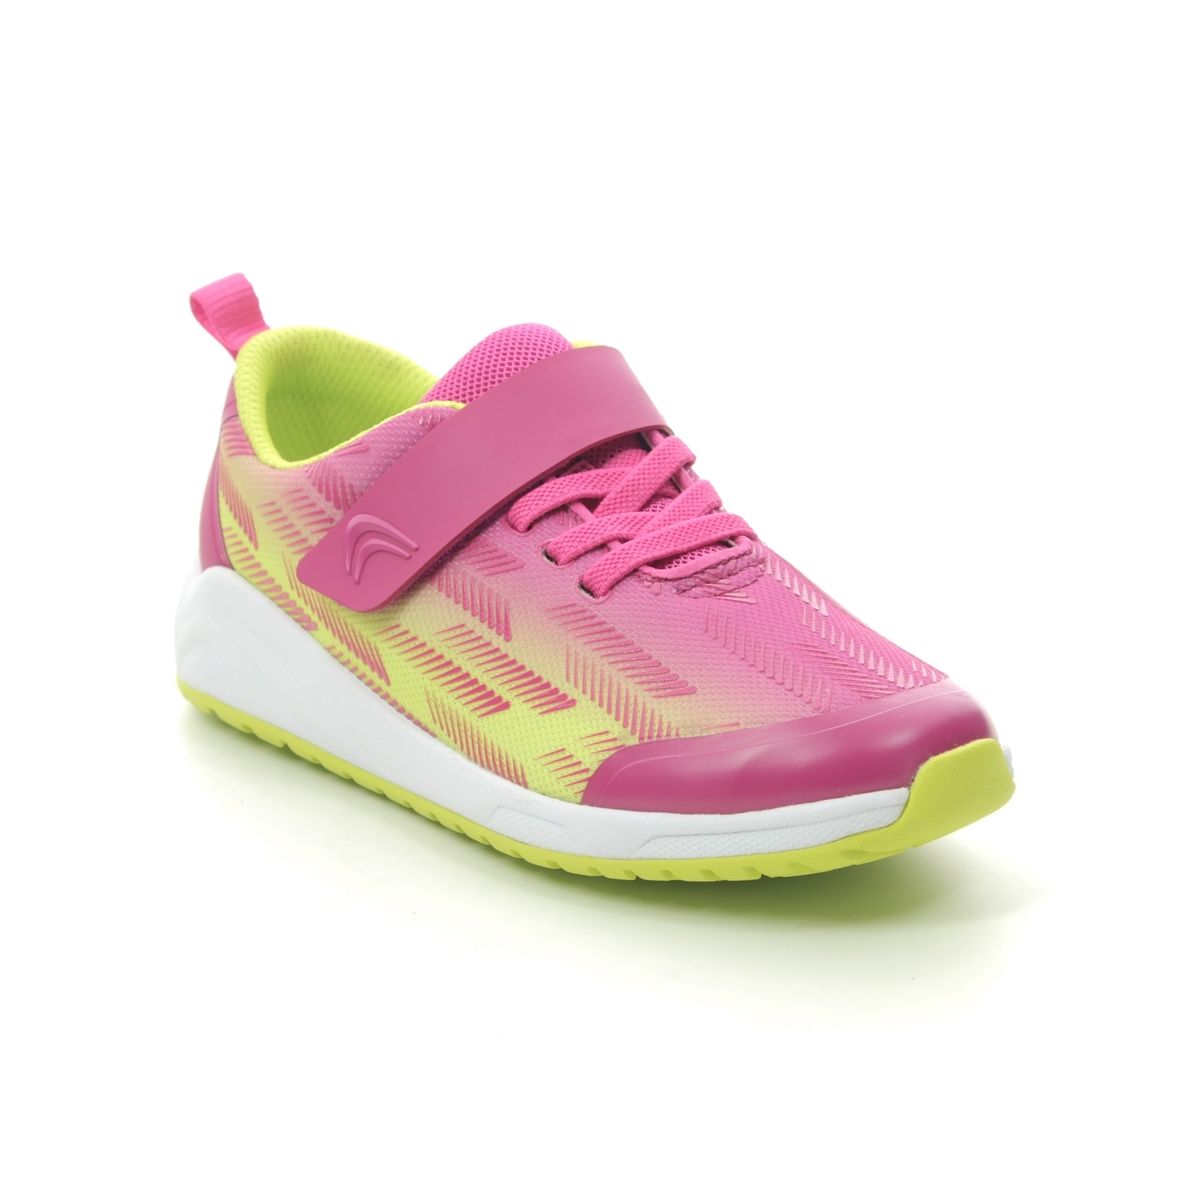 Clarks Aeon Pace K Pink Glitz Kids girls trainers 5154-27G in a Plain Man-made in Size 2.5